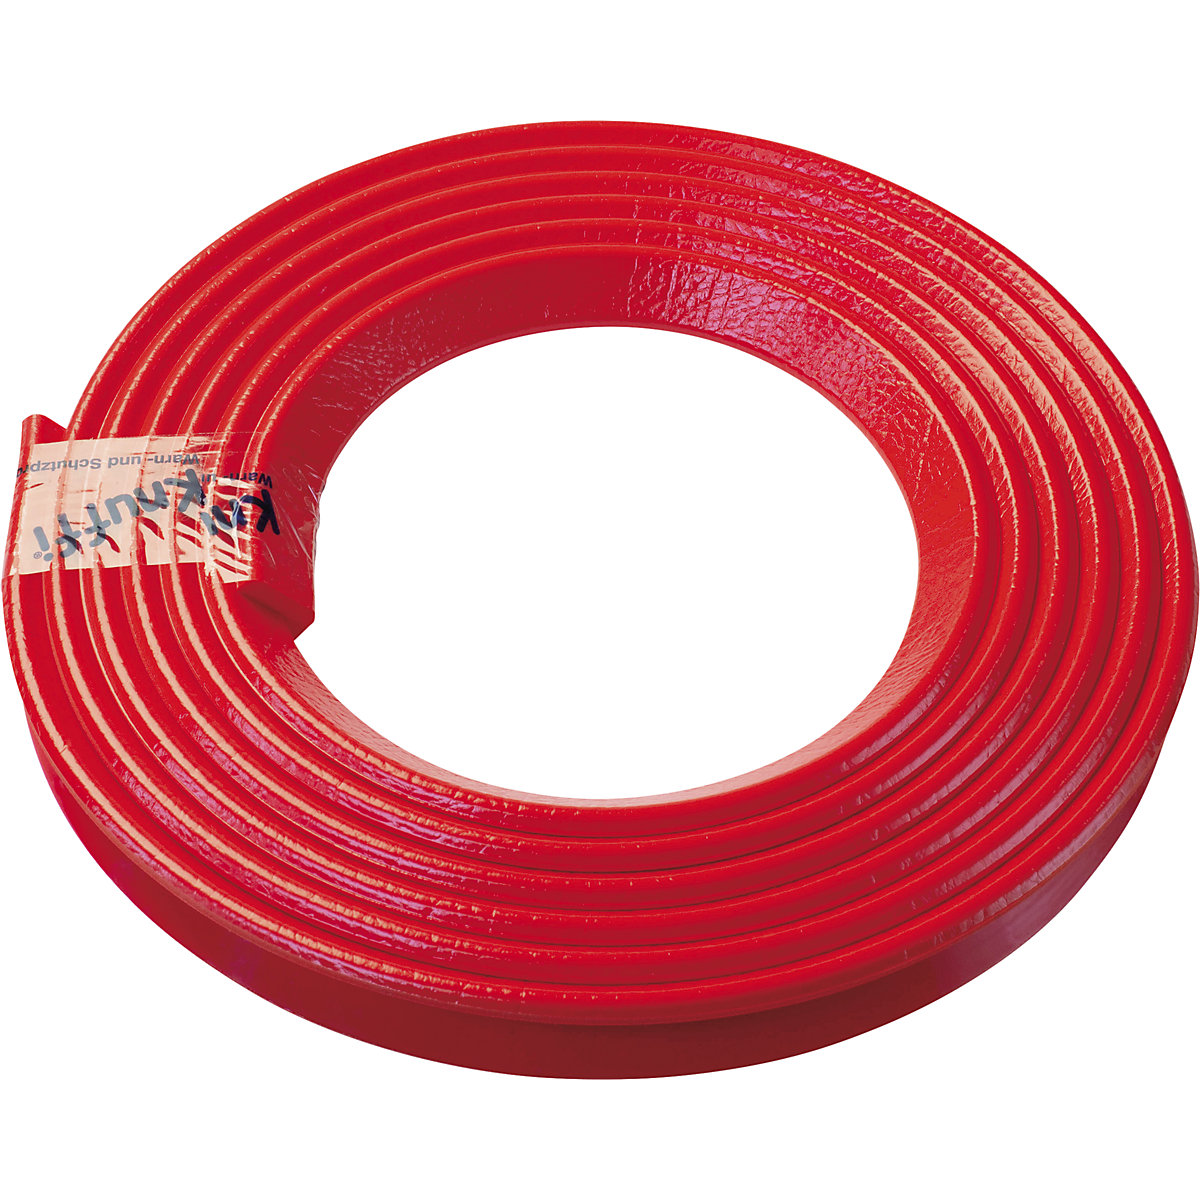 Knuffi® corner protection – SHG, type E, 1 x 5 m roll, red-23